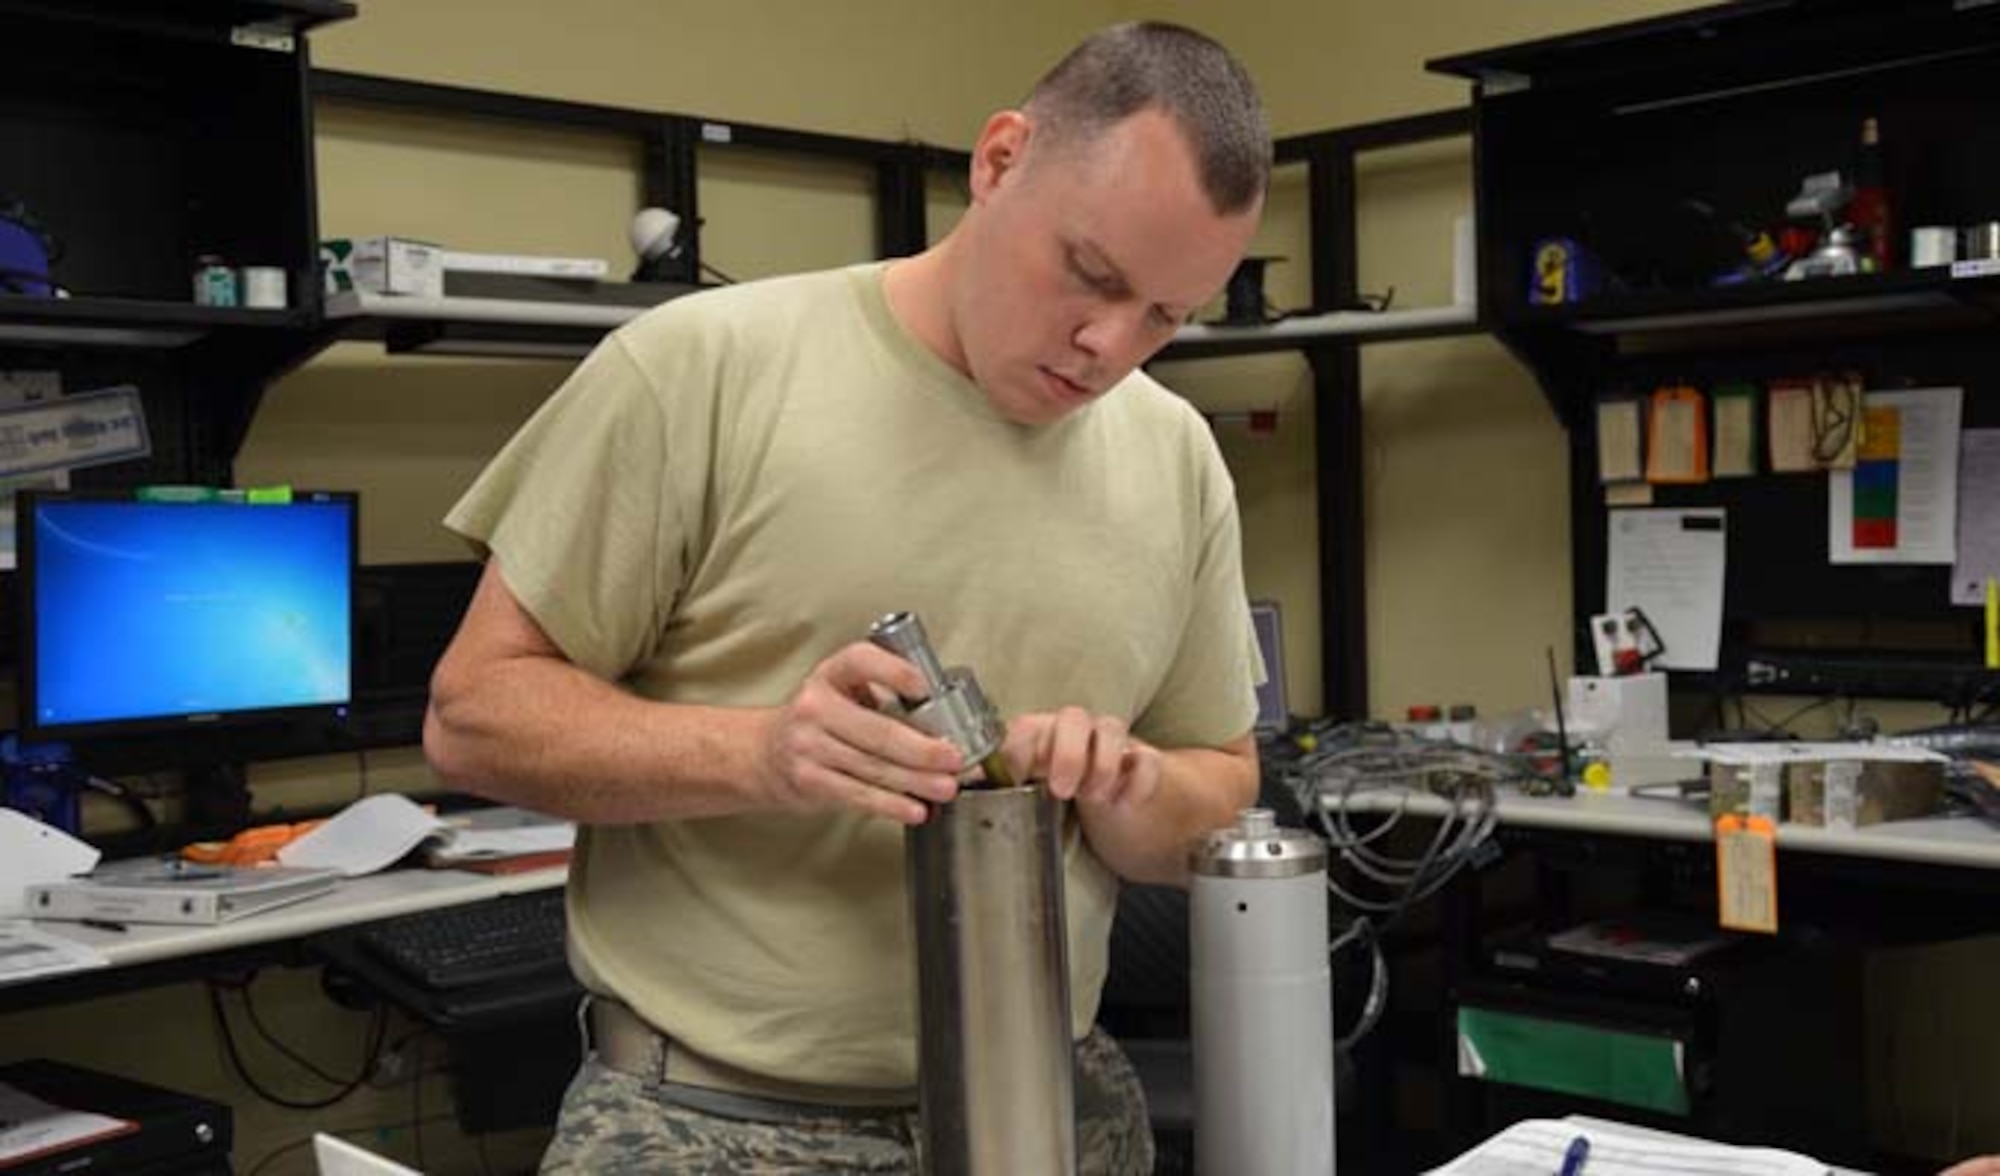 Staff Sgt. Tobee Jefferson, a geophysical maintenance supervisor with the Air Force Technical Applications Center, Patrick AFB, Fla., installs a high-grade, stainless steel instrument head into a 23900 seismometer. (U.S. Air Force photo/Susan A. Romano)